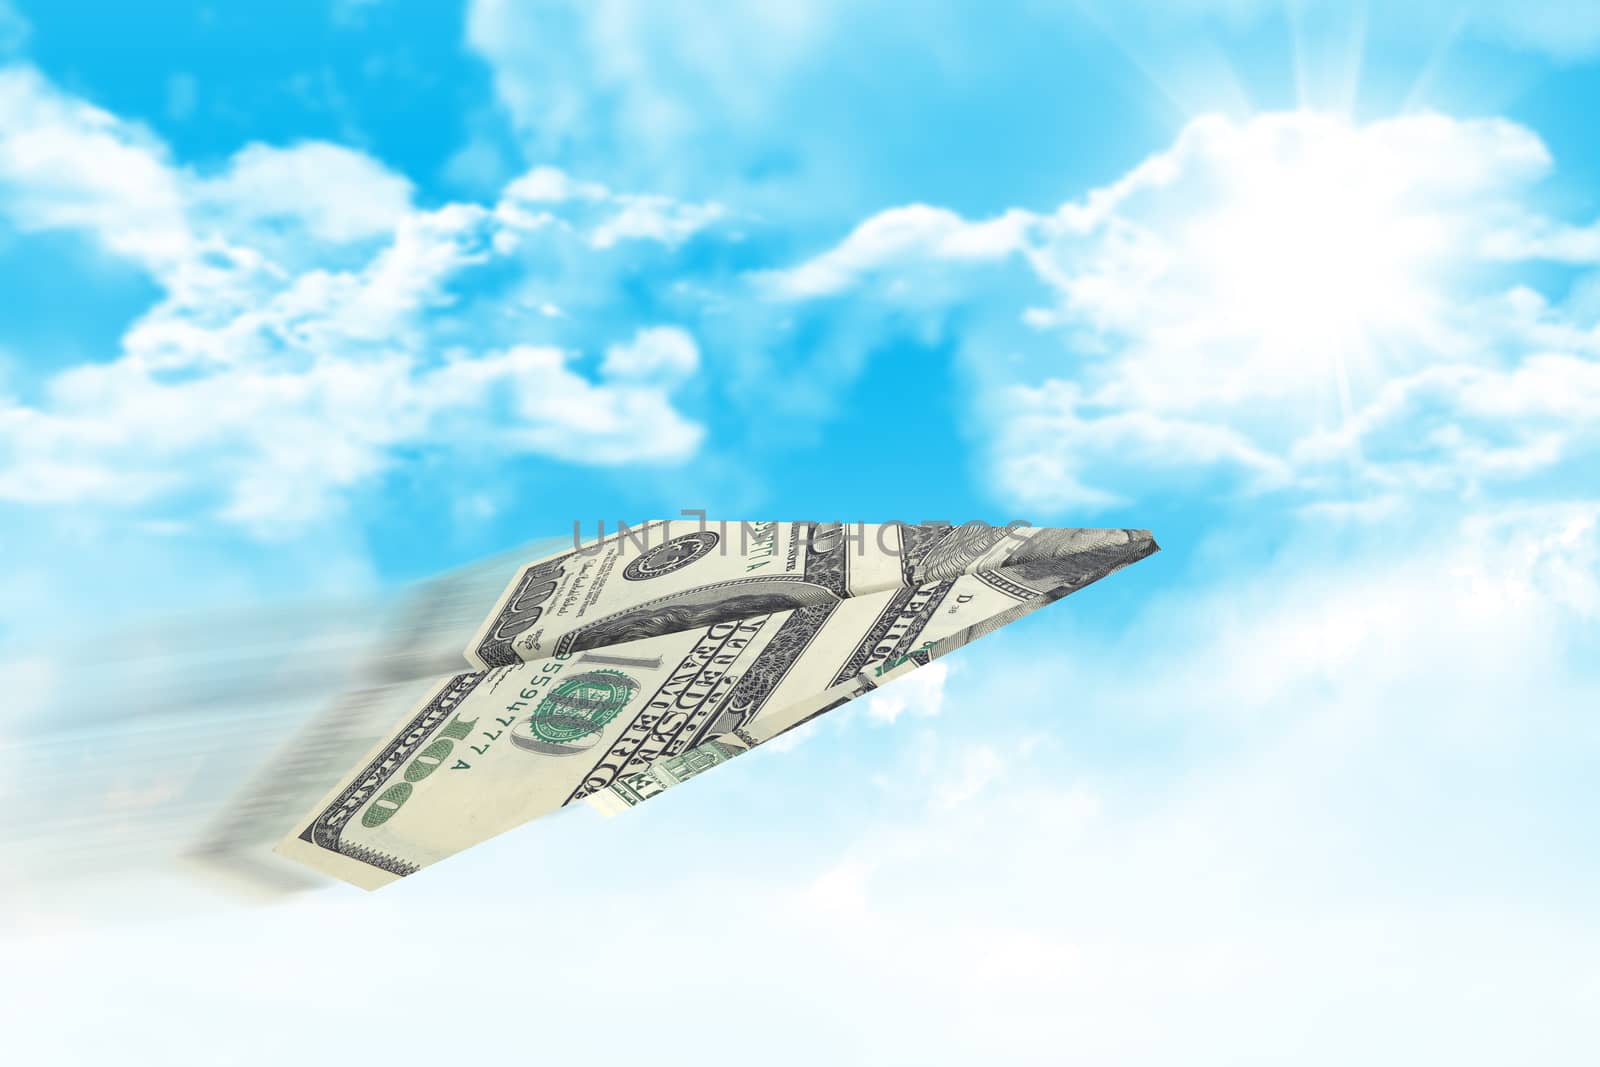 Paper airplane made of hundred dollar bill. Sky and clouds in the background